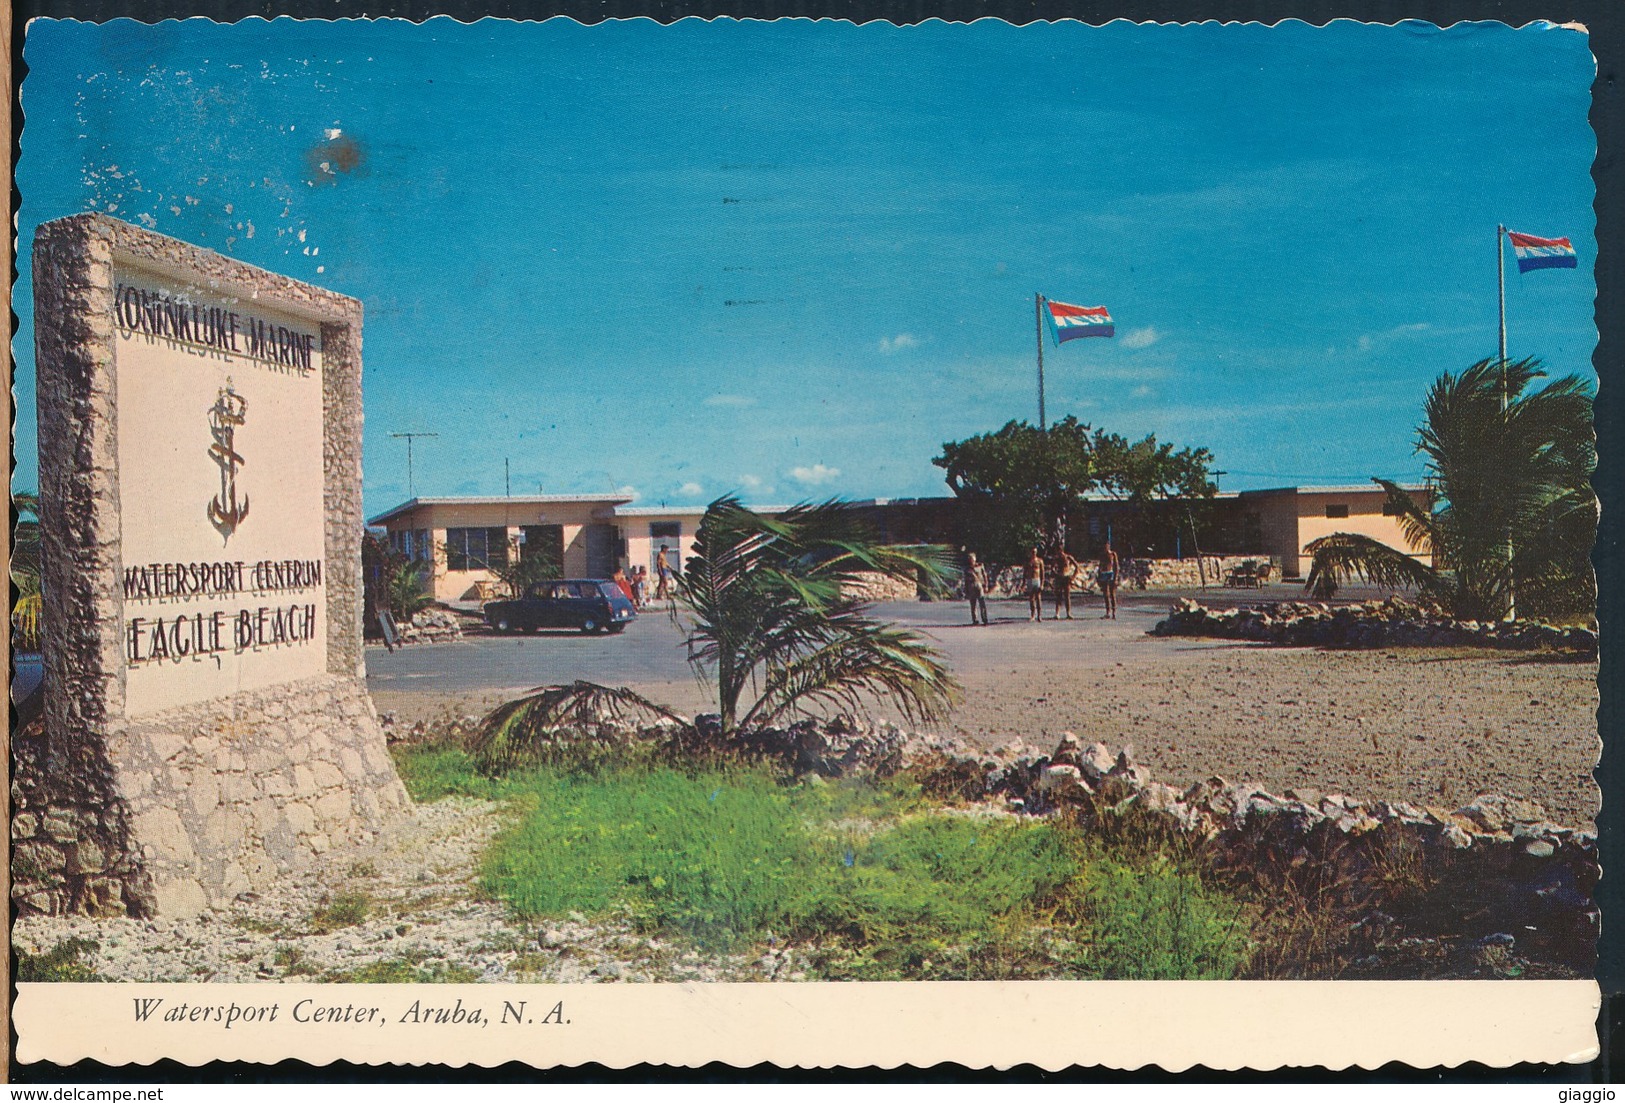 °°° 19310 - ARUBA - WATERSPORT CENTER AT EAGLE BEACH - 1973 With Stamps °°° - Aruba